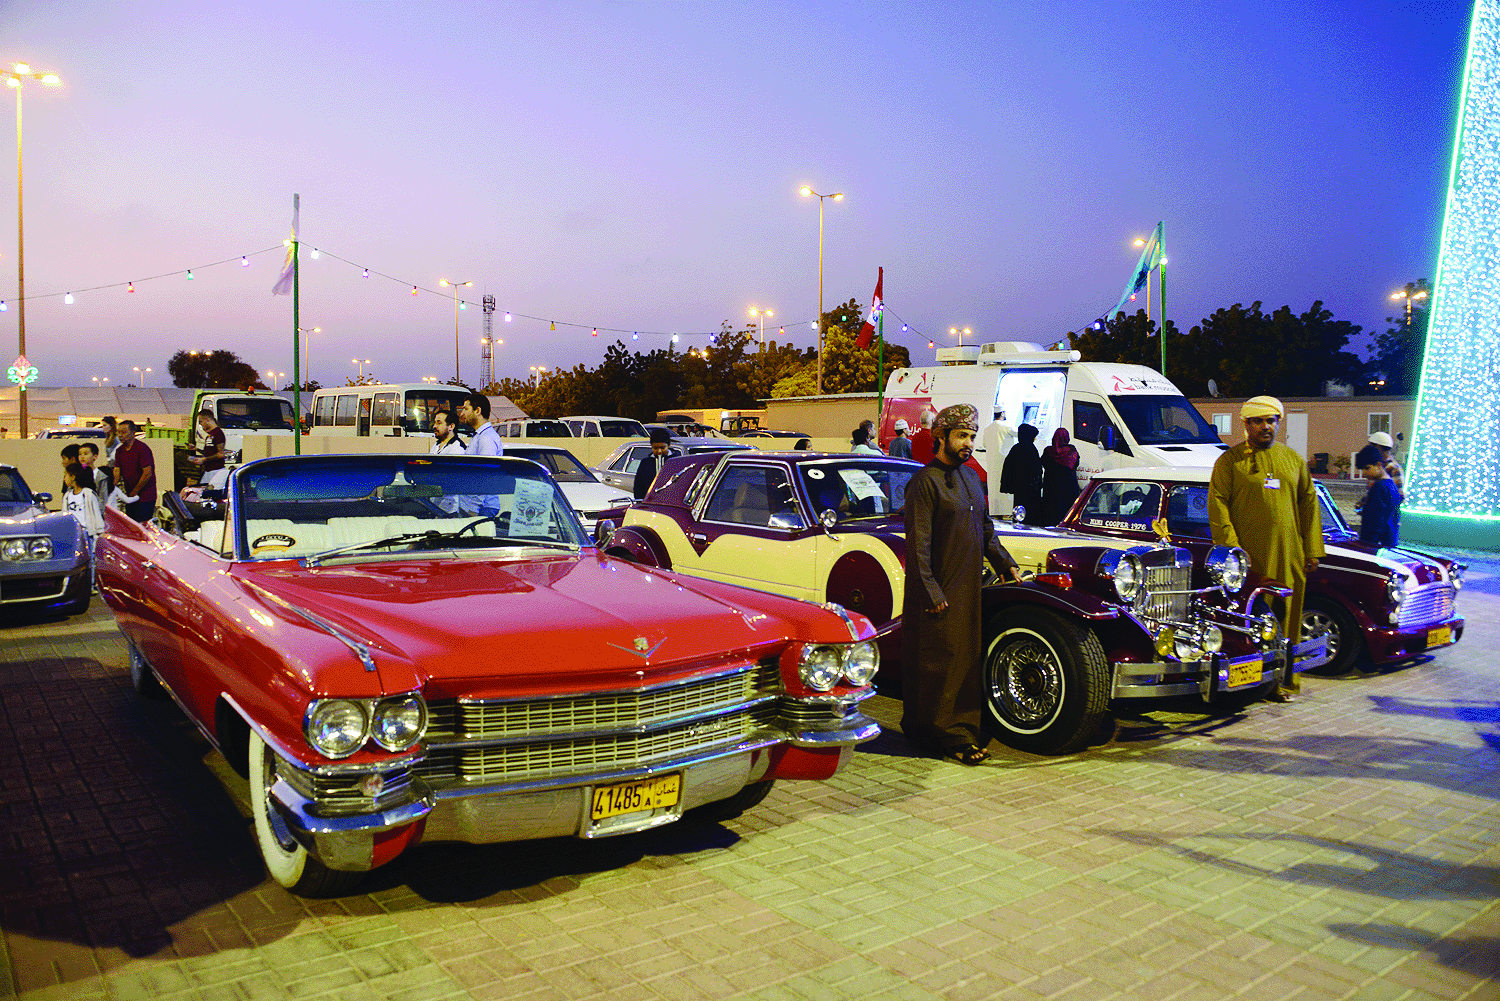 Muscat Festival: Classic cars on display at Naseem Garden